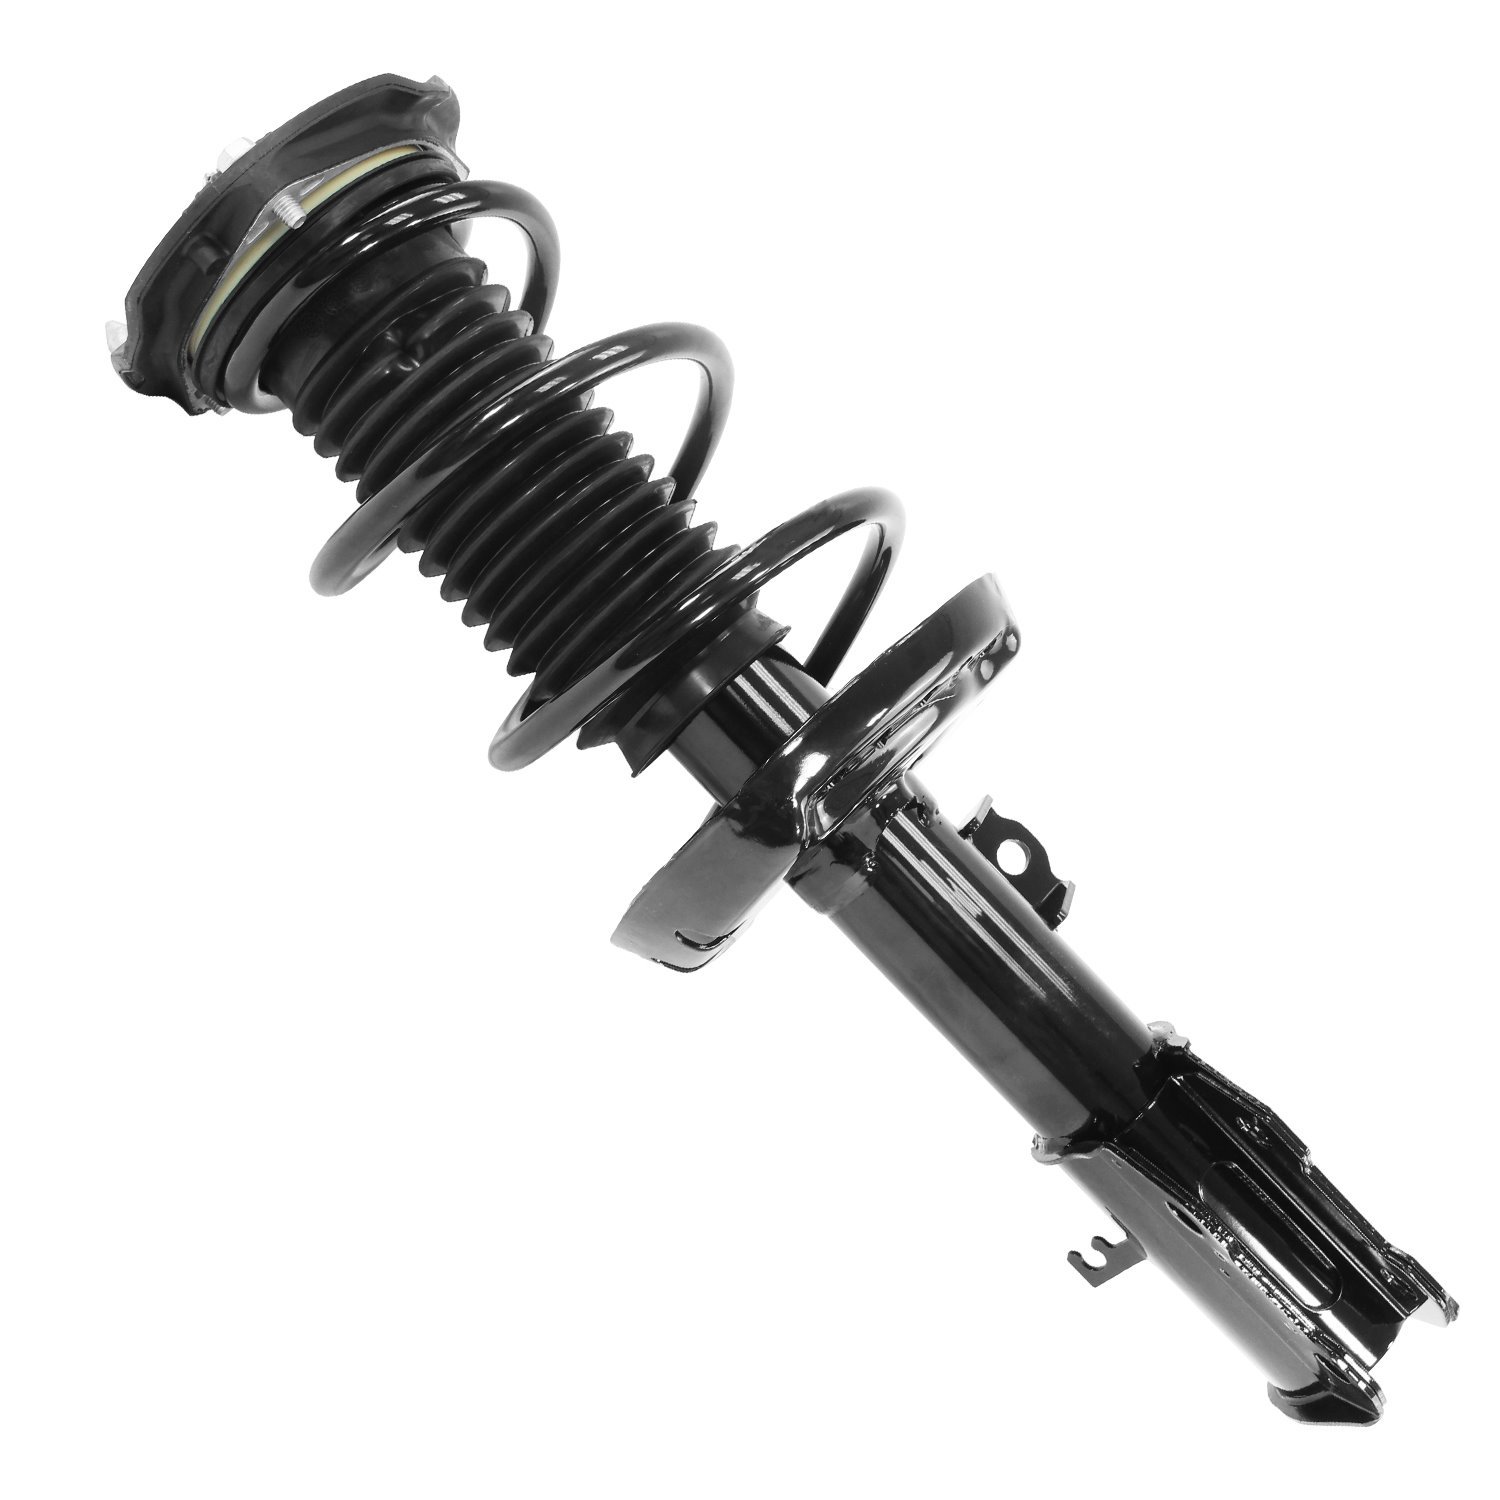 11888 Front Suspension Strut & Coil Spring Assemby Fits Select Chevy Cruze